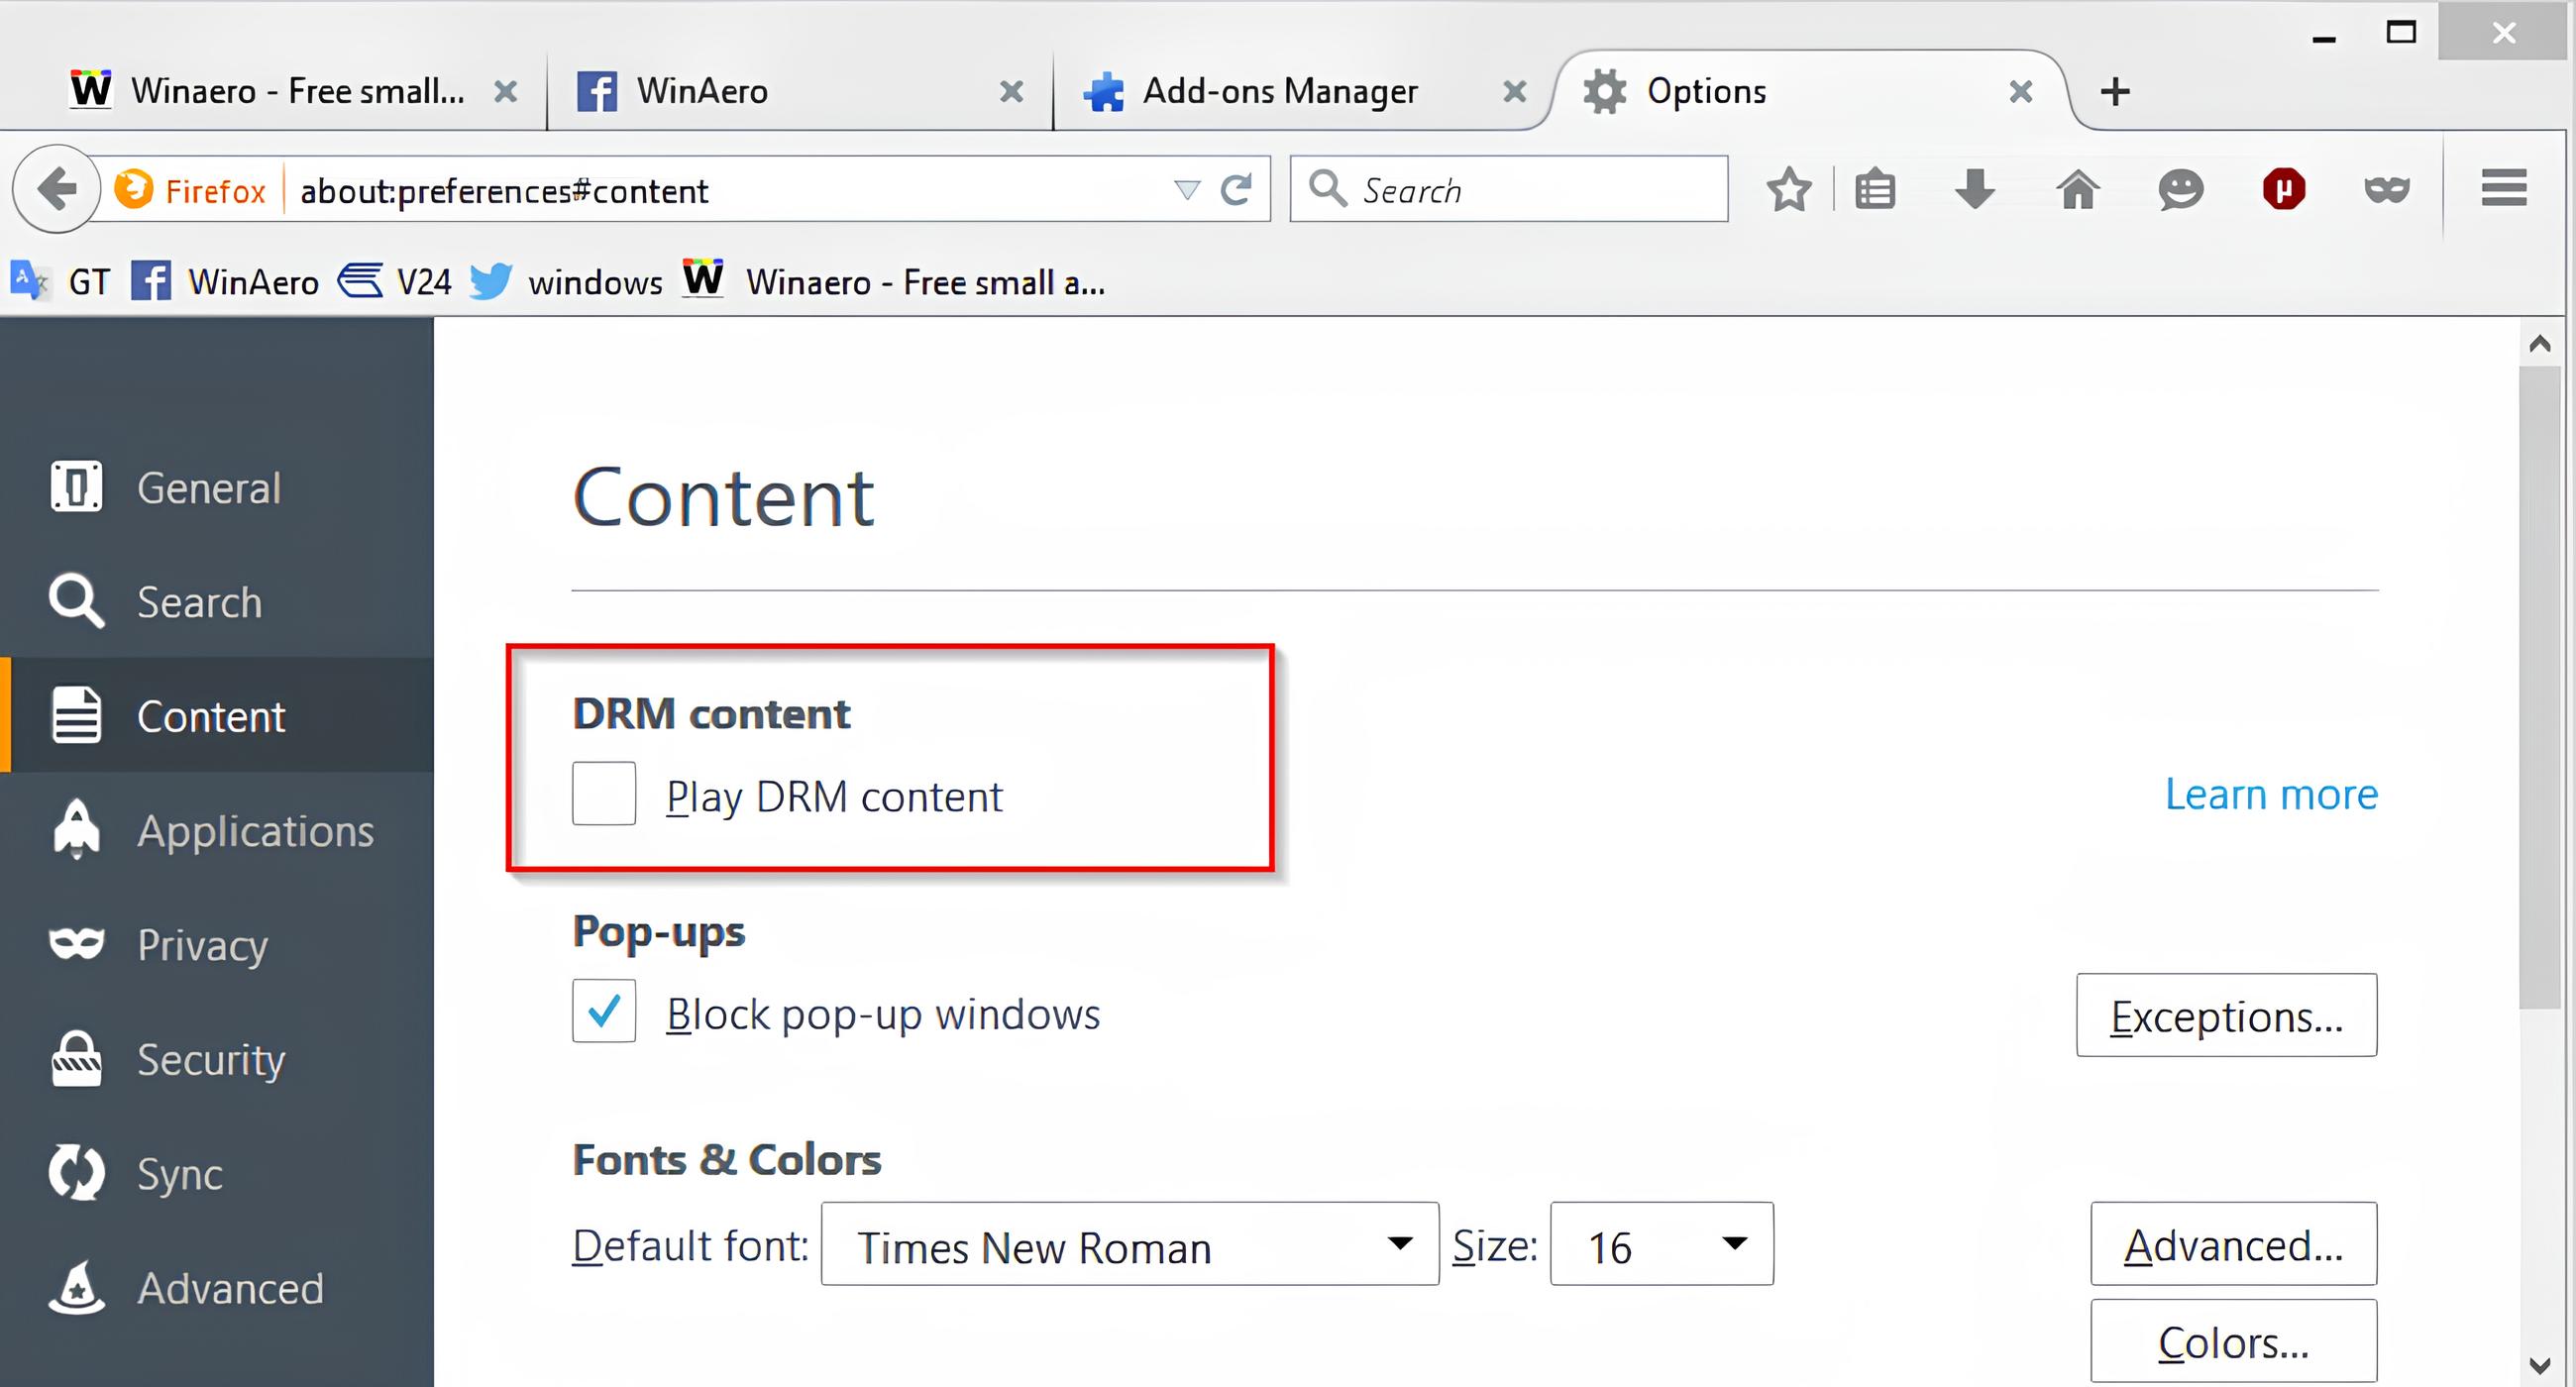 What Is DRM Content In Firefox